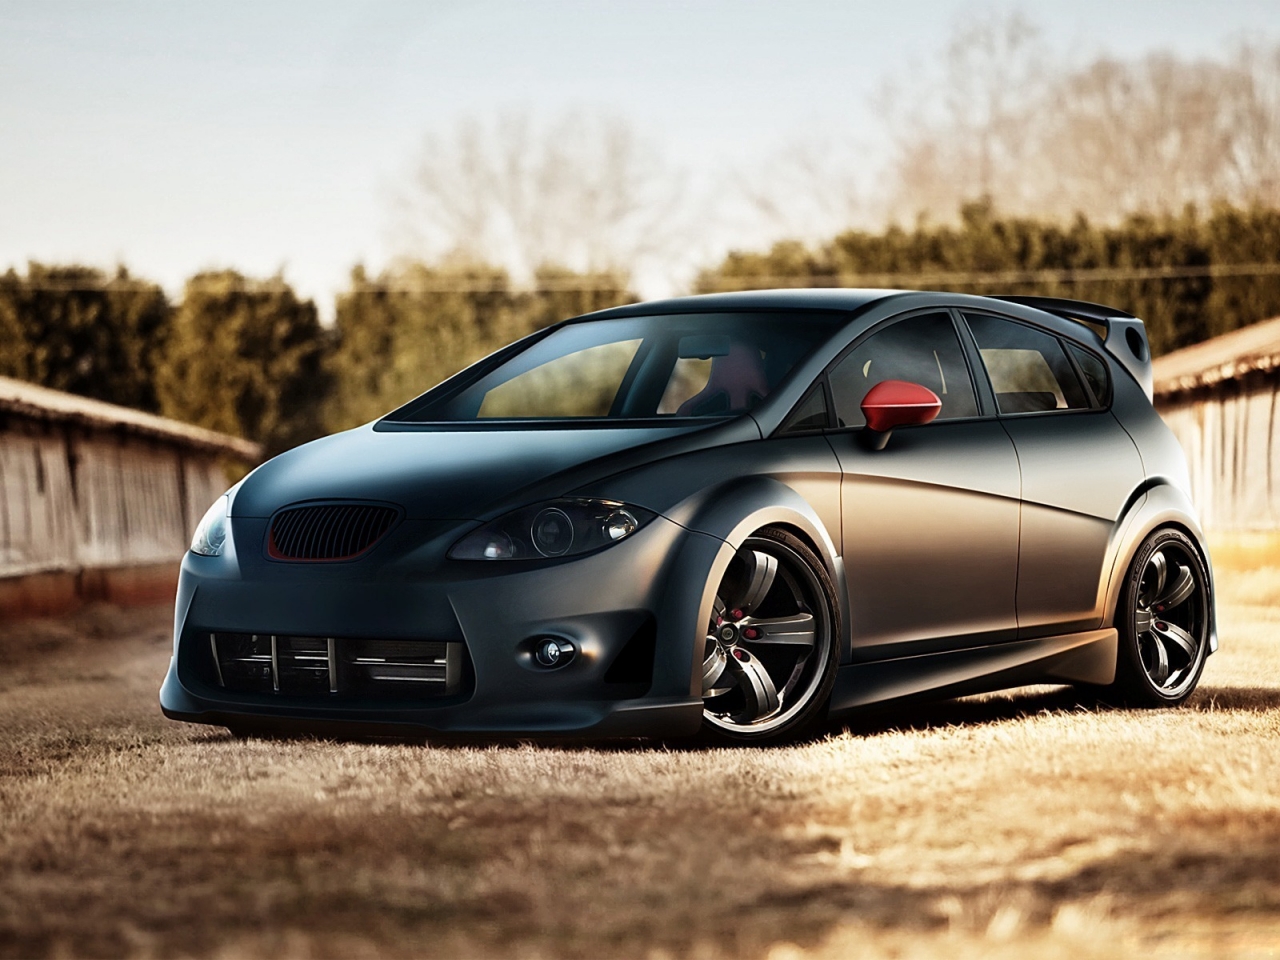 Seat Leon Tunning Front Angle for 1280 x 960 resolution